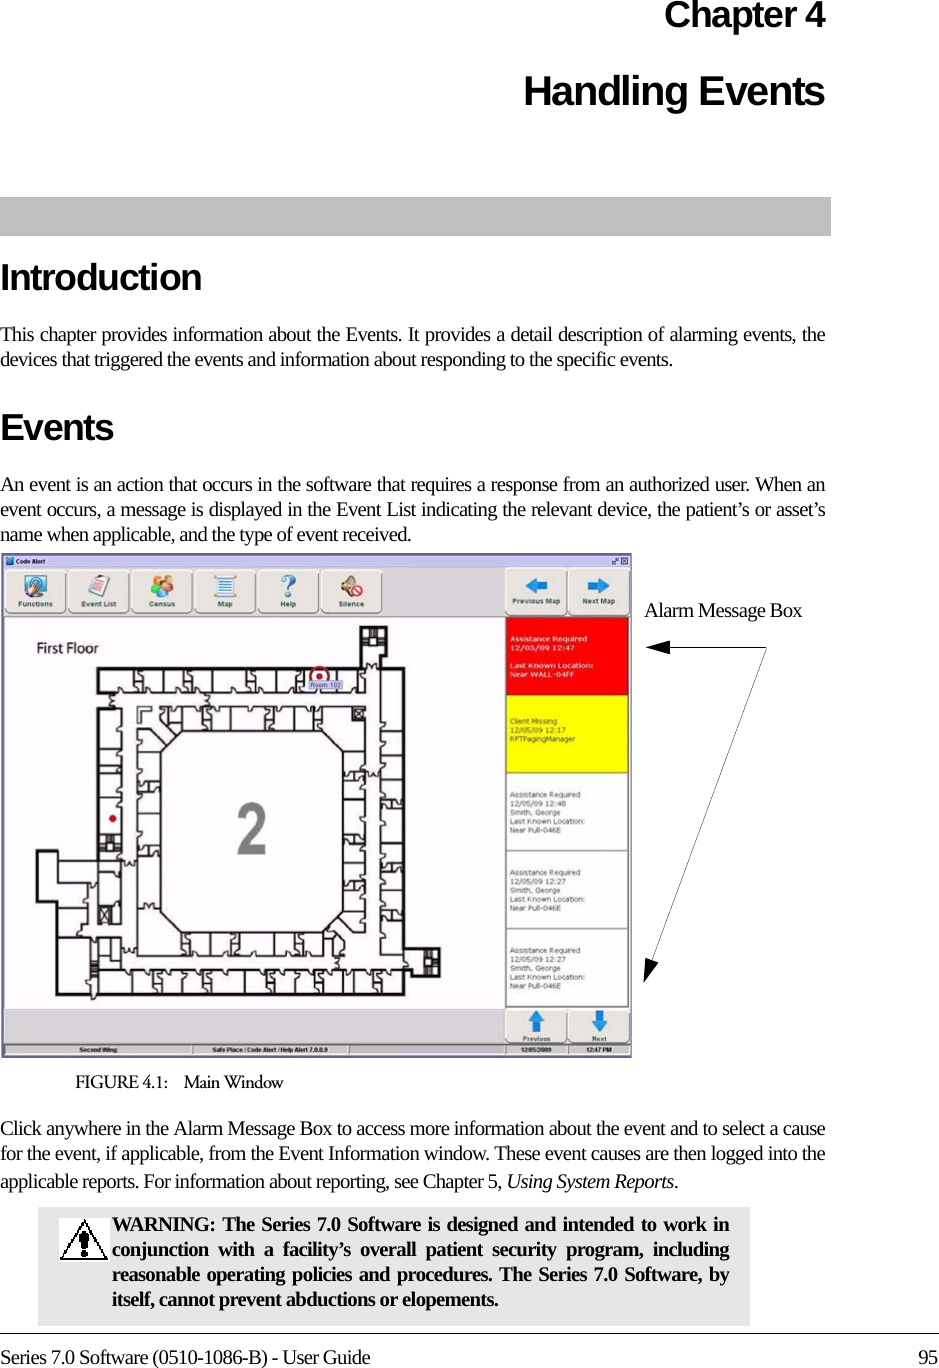 Series 7.0 Software (0510-1086-B) - User Guide 95Chapter 4Handling EventsIntroductionThis chapter provides information about the Events. It provides a detail description of alarming events, the devices that triggered the events and information about responding to the specific events. Events An event is an action that occurs in the software that requires a response from an authorized user. When an event occurs, a message is displayed in the Event List indicating the relevant device, the patient’s or asset’s name when applicable, and the type of event received. FIGURE 4.1:    Main WindowClick anywhere in the Alarm Message Box to access more information about the event and to select a cause for the event, if applicable, from the Event Information window. These event causes are then logged into the applicable reports. For information about reporting, see Chapter 5, Using System Reports.WARNING: The Series 7.0 Software is designed and intended to work in conjunction with a facility’s overall patient security program, including reasonable operating policies and procedures. The Series 7.0 Software, by itself, cannot prevent abductions or elopements. Alarm Message Box